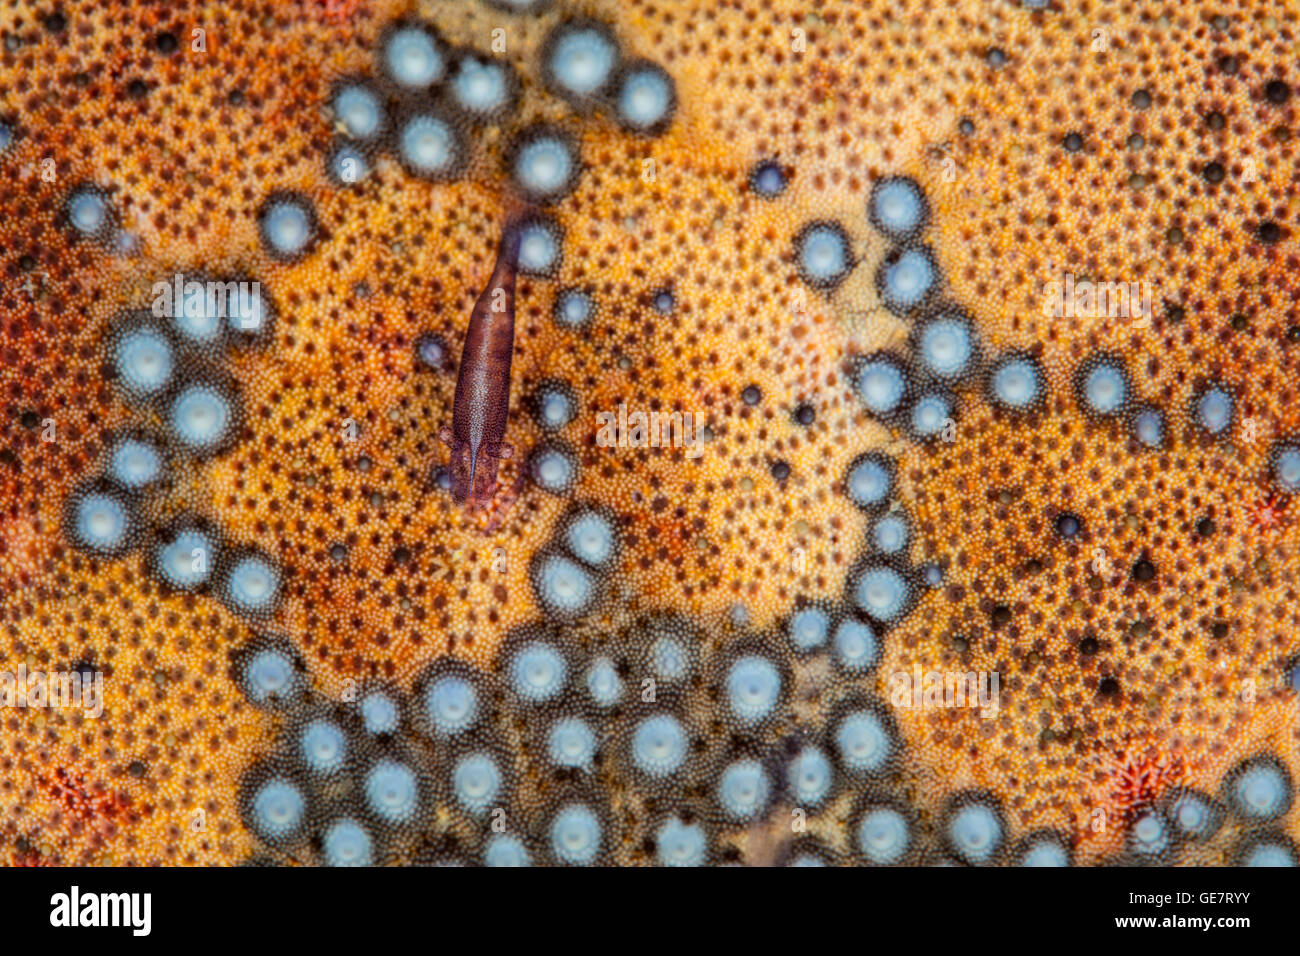 Detail of a Pin cushion starfish and shrimp on a coral reef in the Indo-Pacific. This region harbors high marine biodiversity. Stock Photo